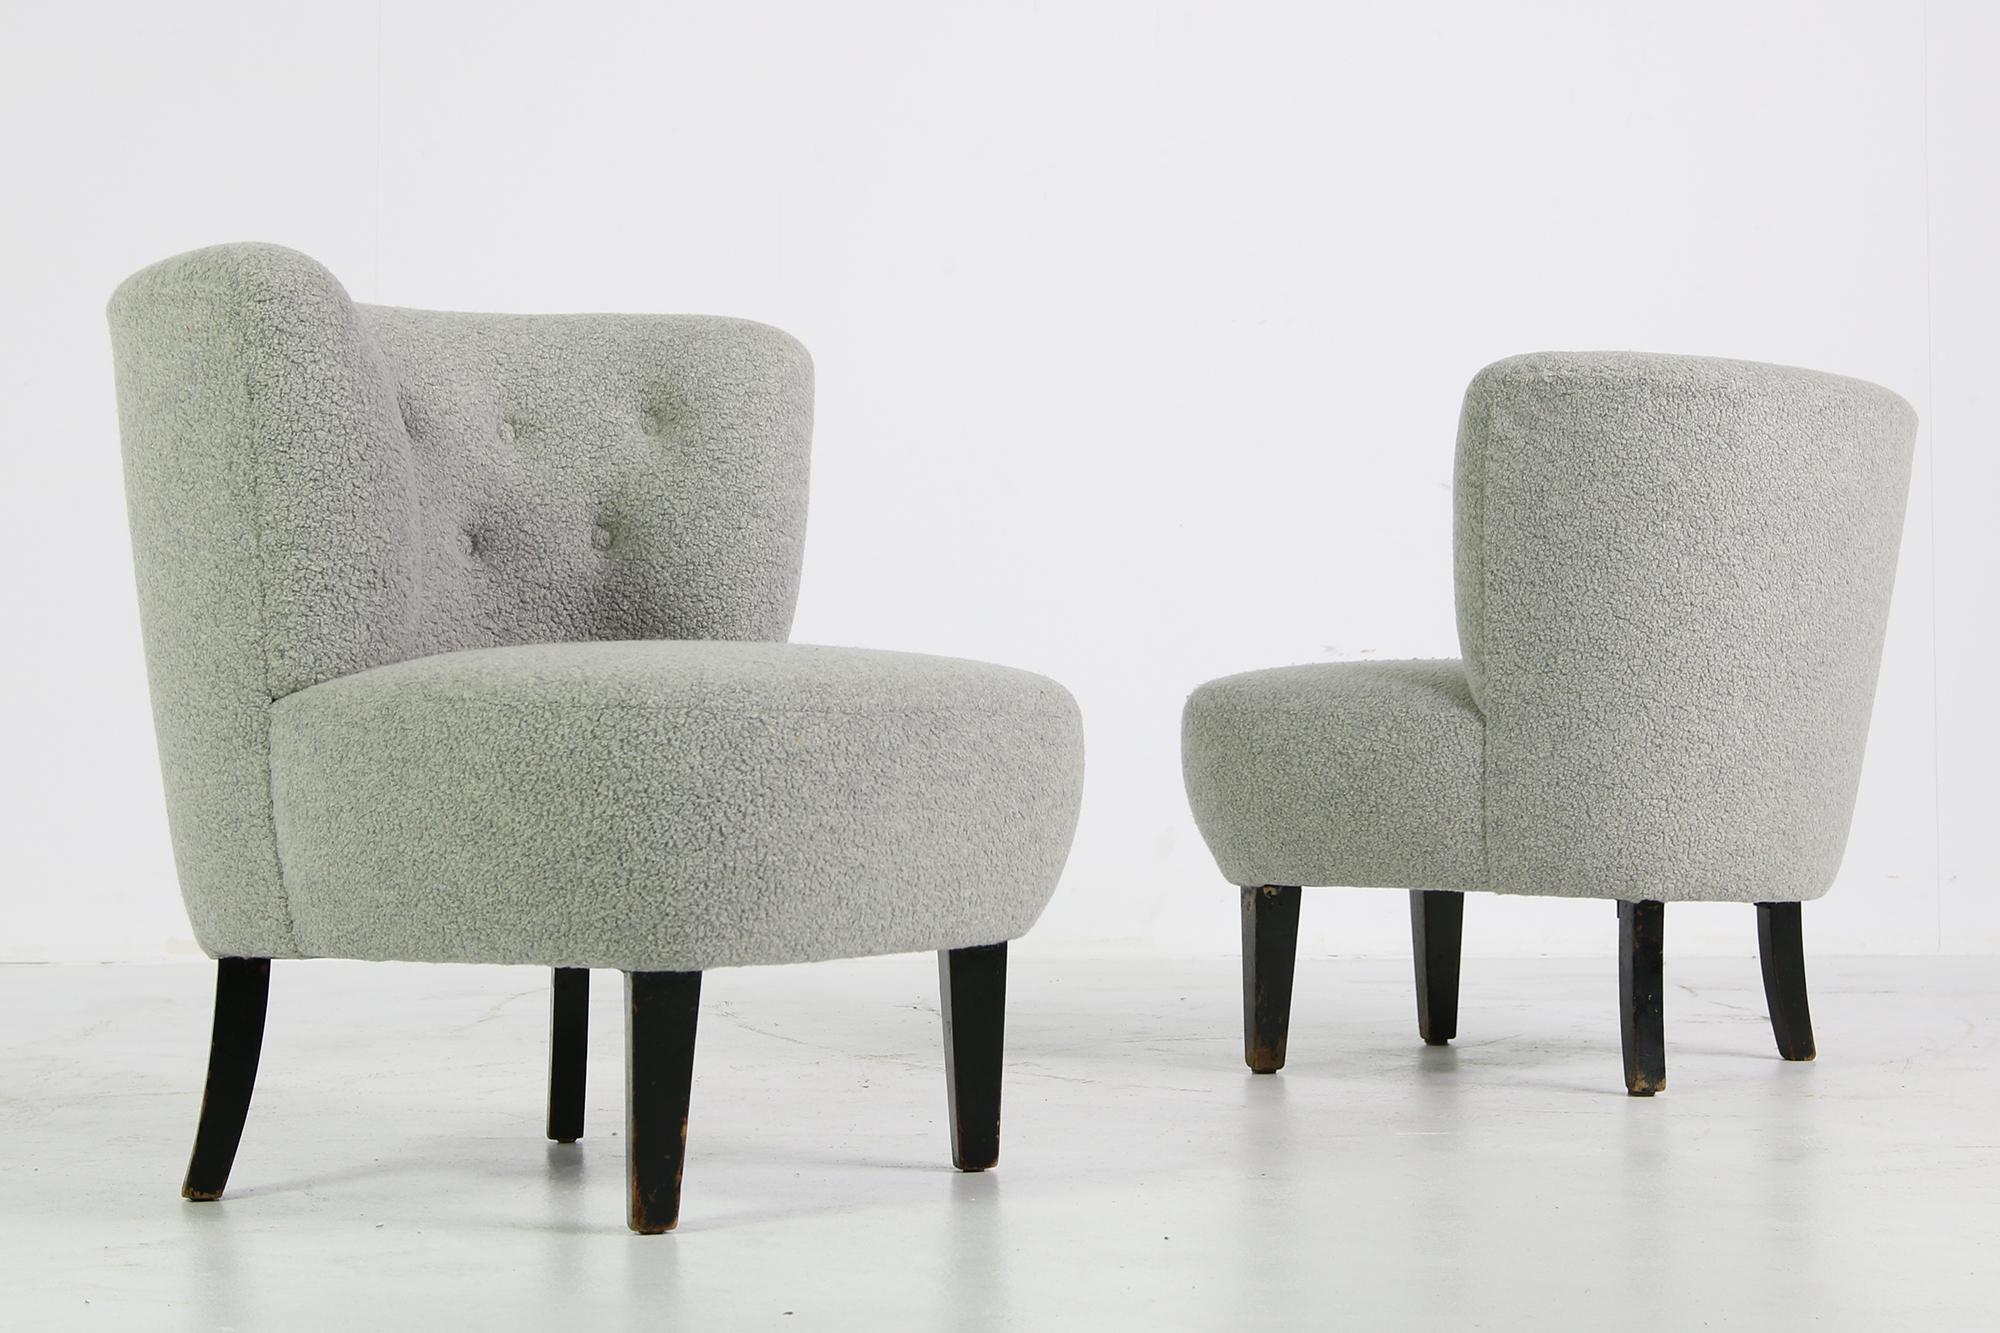 Beautiful 1950s lounge chairs, design attributed to Otto Schultz, Sweden, very rare pieces, vintage pieces, beechwood legs, new upholstery and covered with a teddy faux fur fabric, a boucle fabric in light grey, super soft cotton fur, soft to the